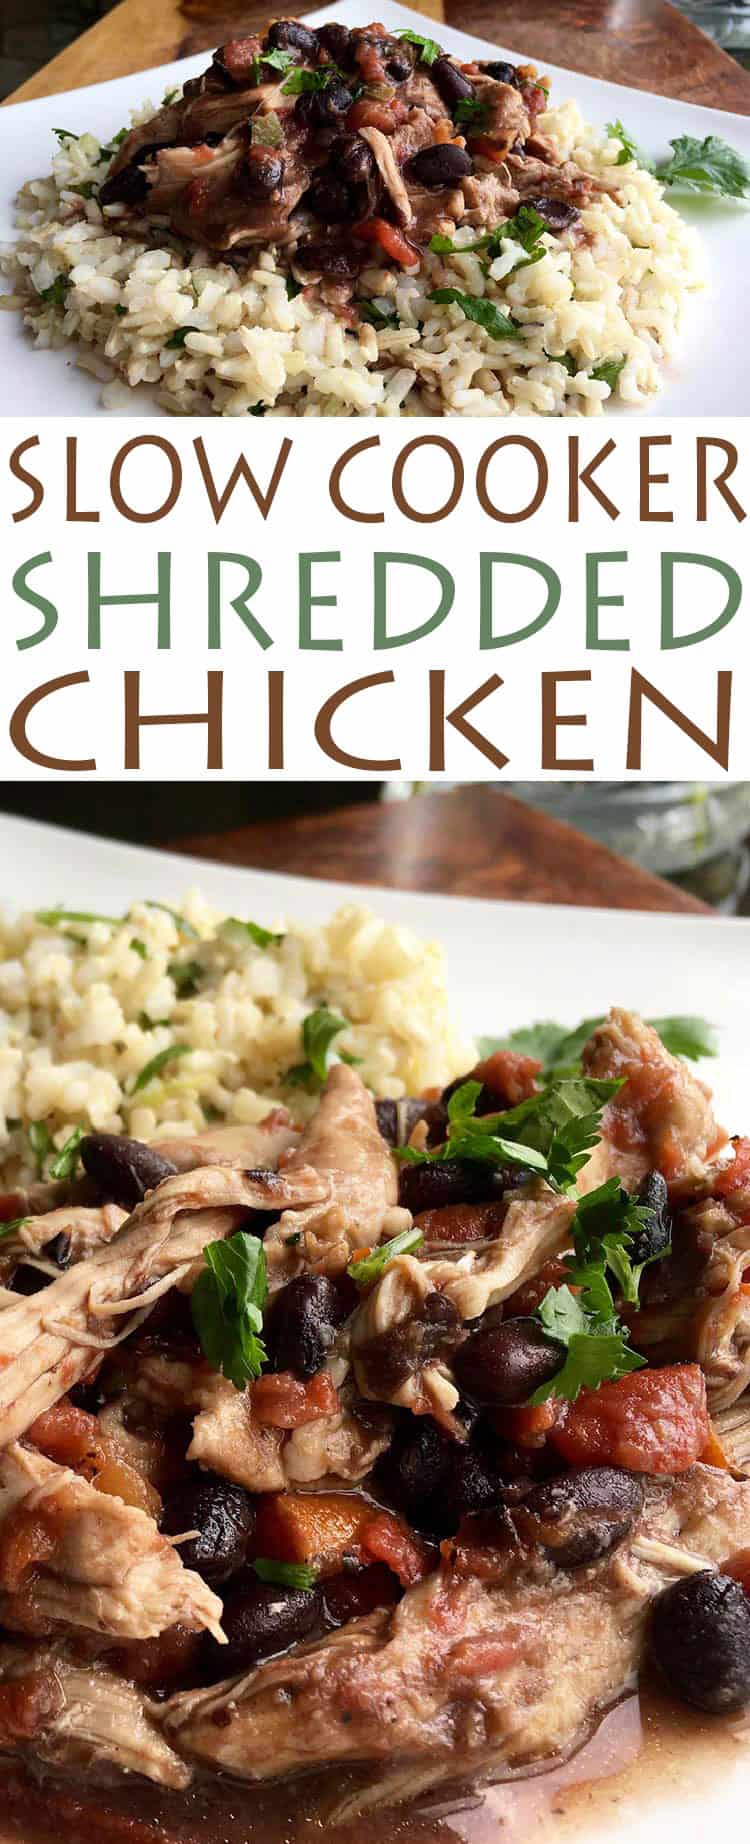 Our Slow Cooker Shredded Chicken dinner makes a delicious and easy weeknight meal. Have dinner on the table in no time with easy slow cooker recipes.